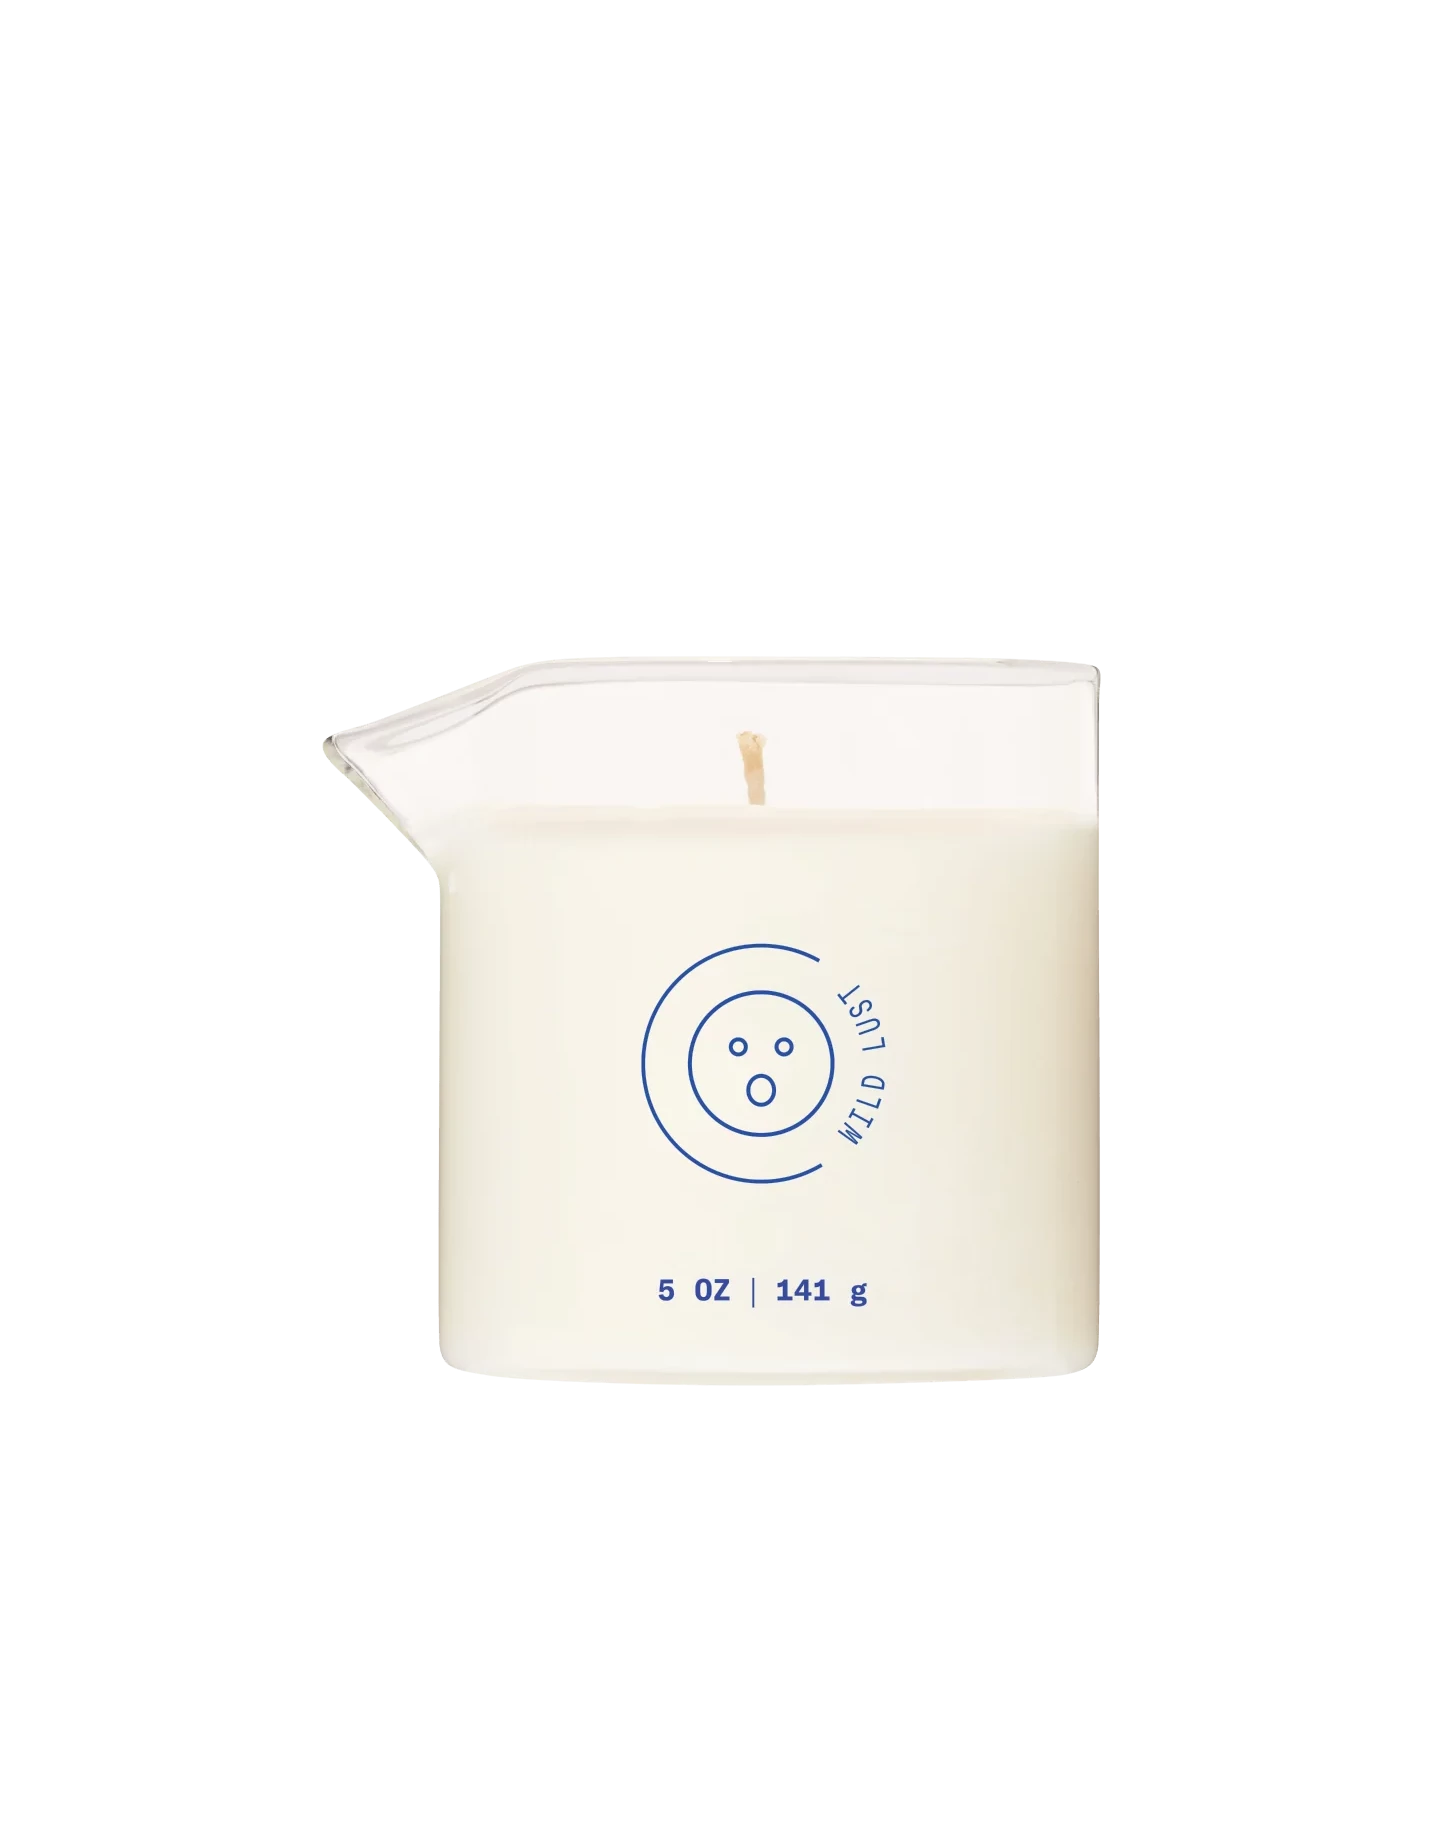 Dame massage oil candle available at Ease Toronto